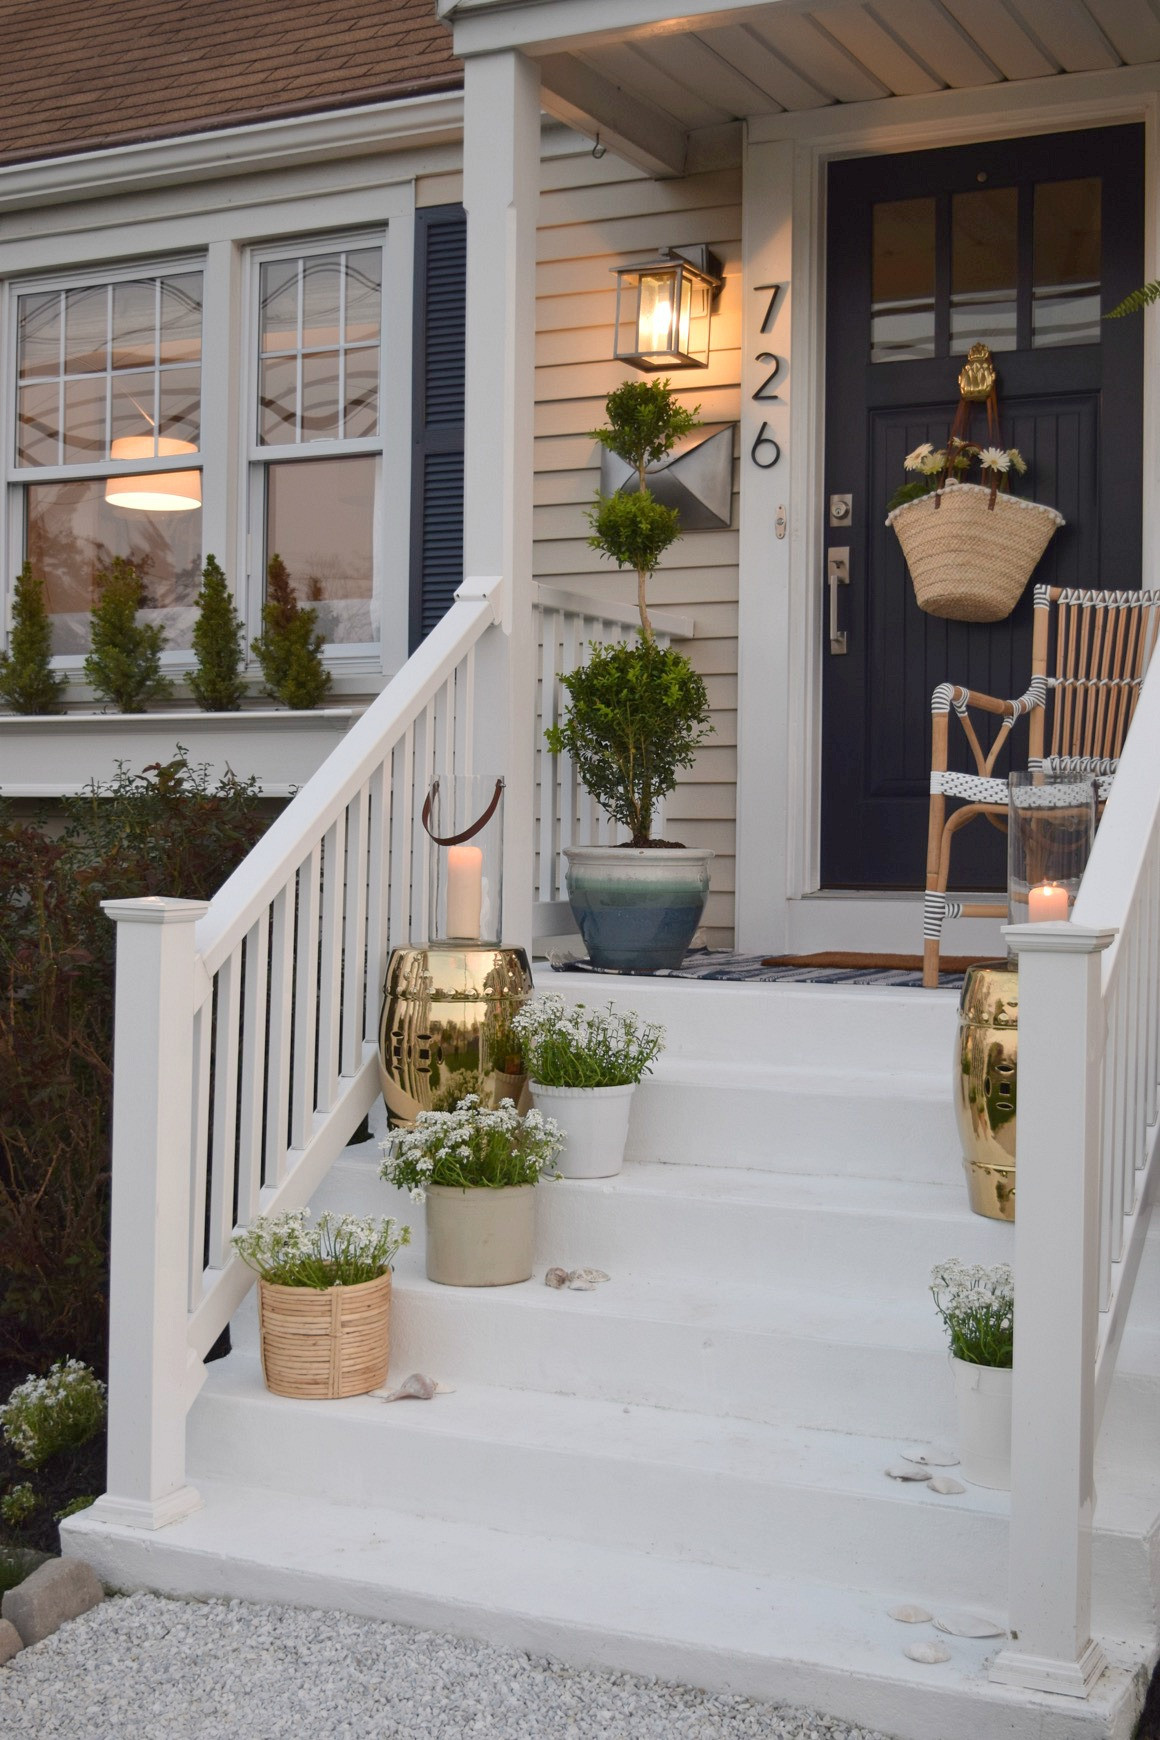 Backyard Porch Ideas
 Front Porch Ideas and Designing the Outdoors Nesting